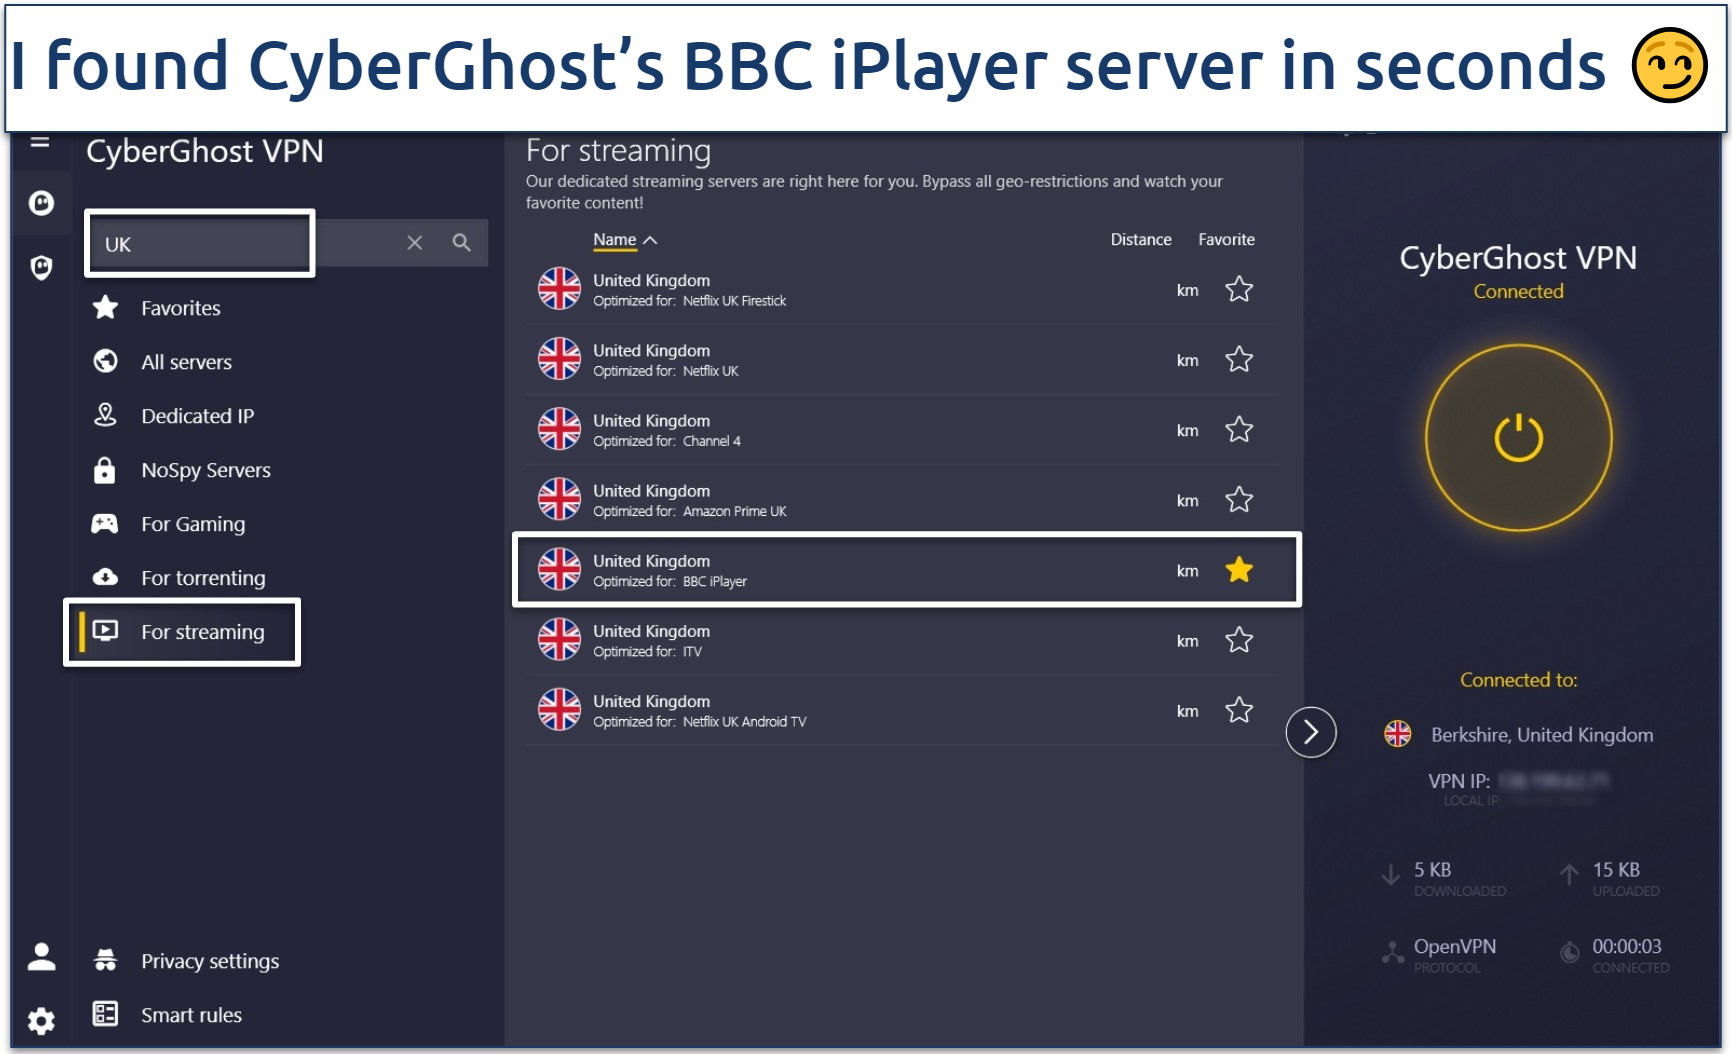 A screenshot of CyberGhost's app interface with its UK streaming servers.